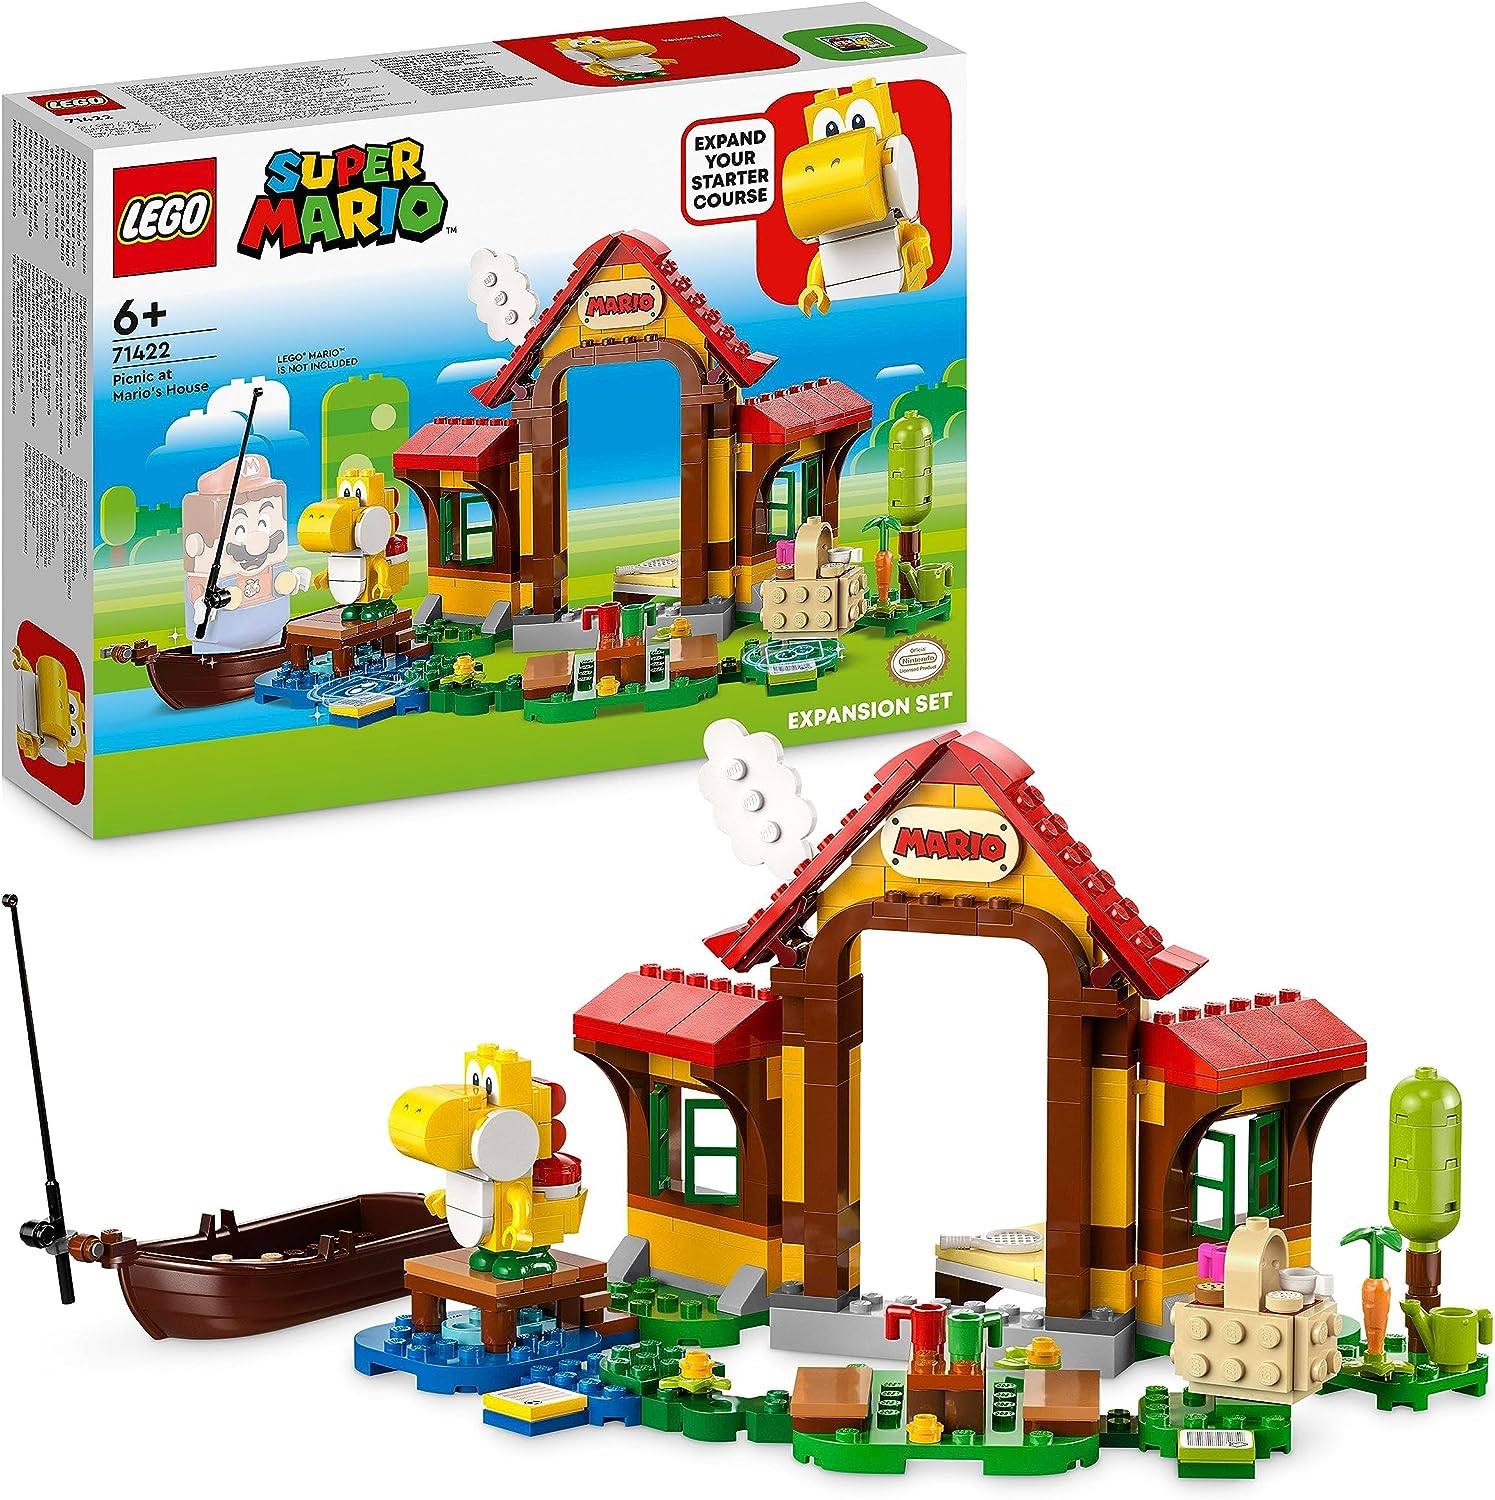 LEGO 71422 Super Mario Picnic at Mario - Expansion Set, Toy with Yellow Yoshi Figure to Combine with a Starter Set, Gift for Children, Boys and Girls from 6 Years